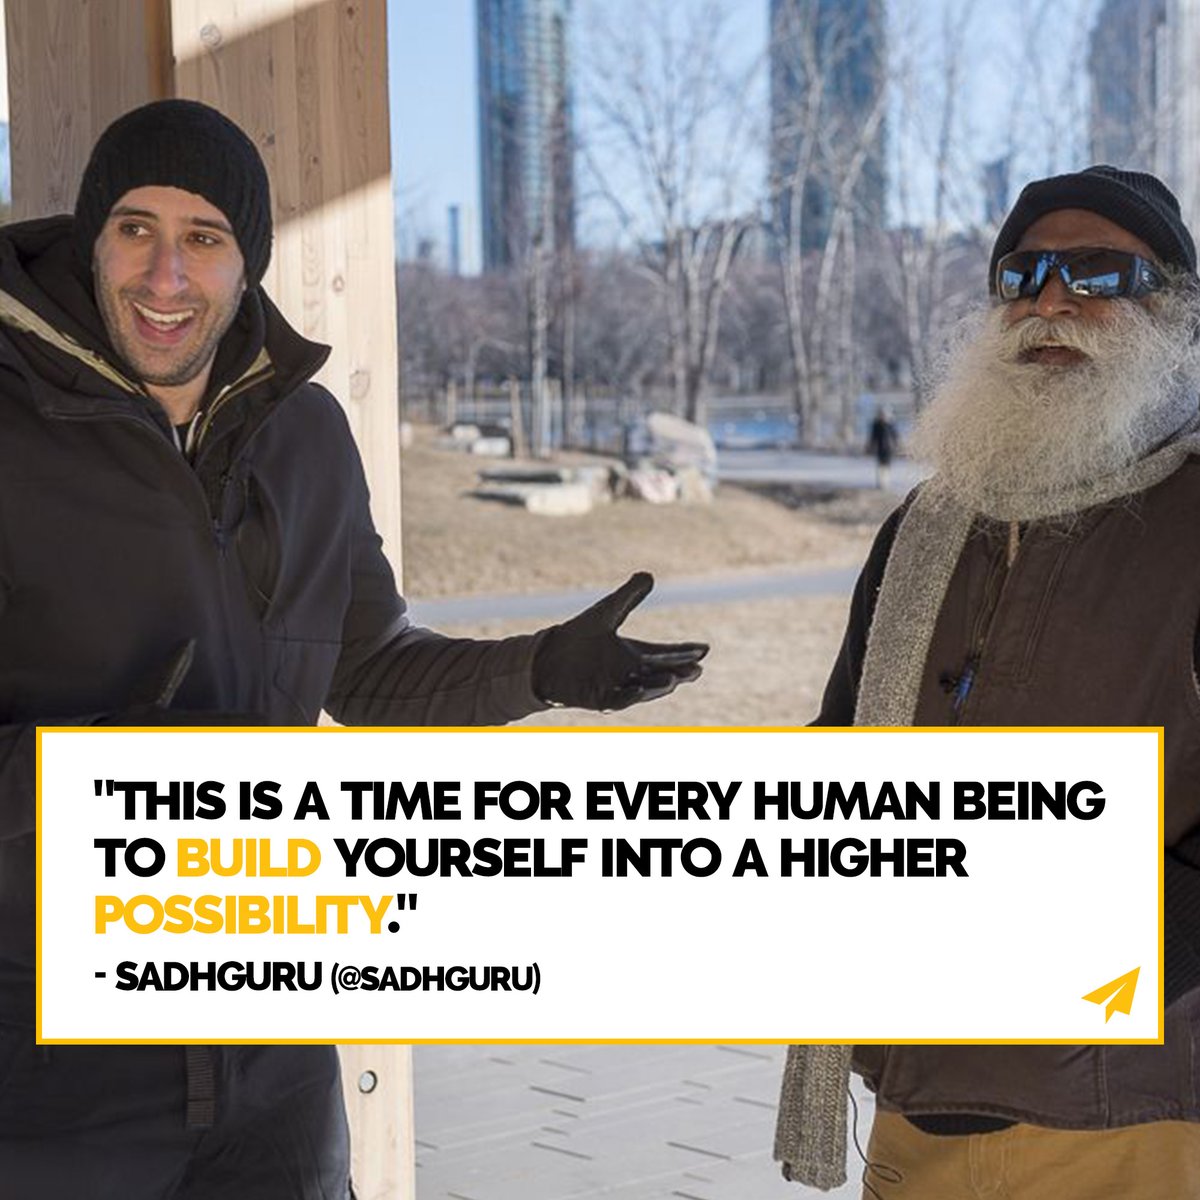 'This is a time for every human being to build yourself into a higher possibility'. - Sadhguru

What do you think?
______________________________________

#sadhguru #awaken #buildyourself